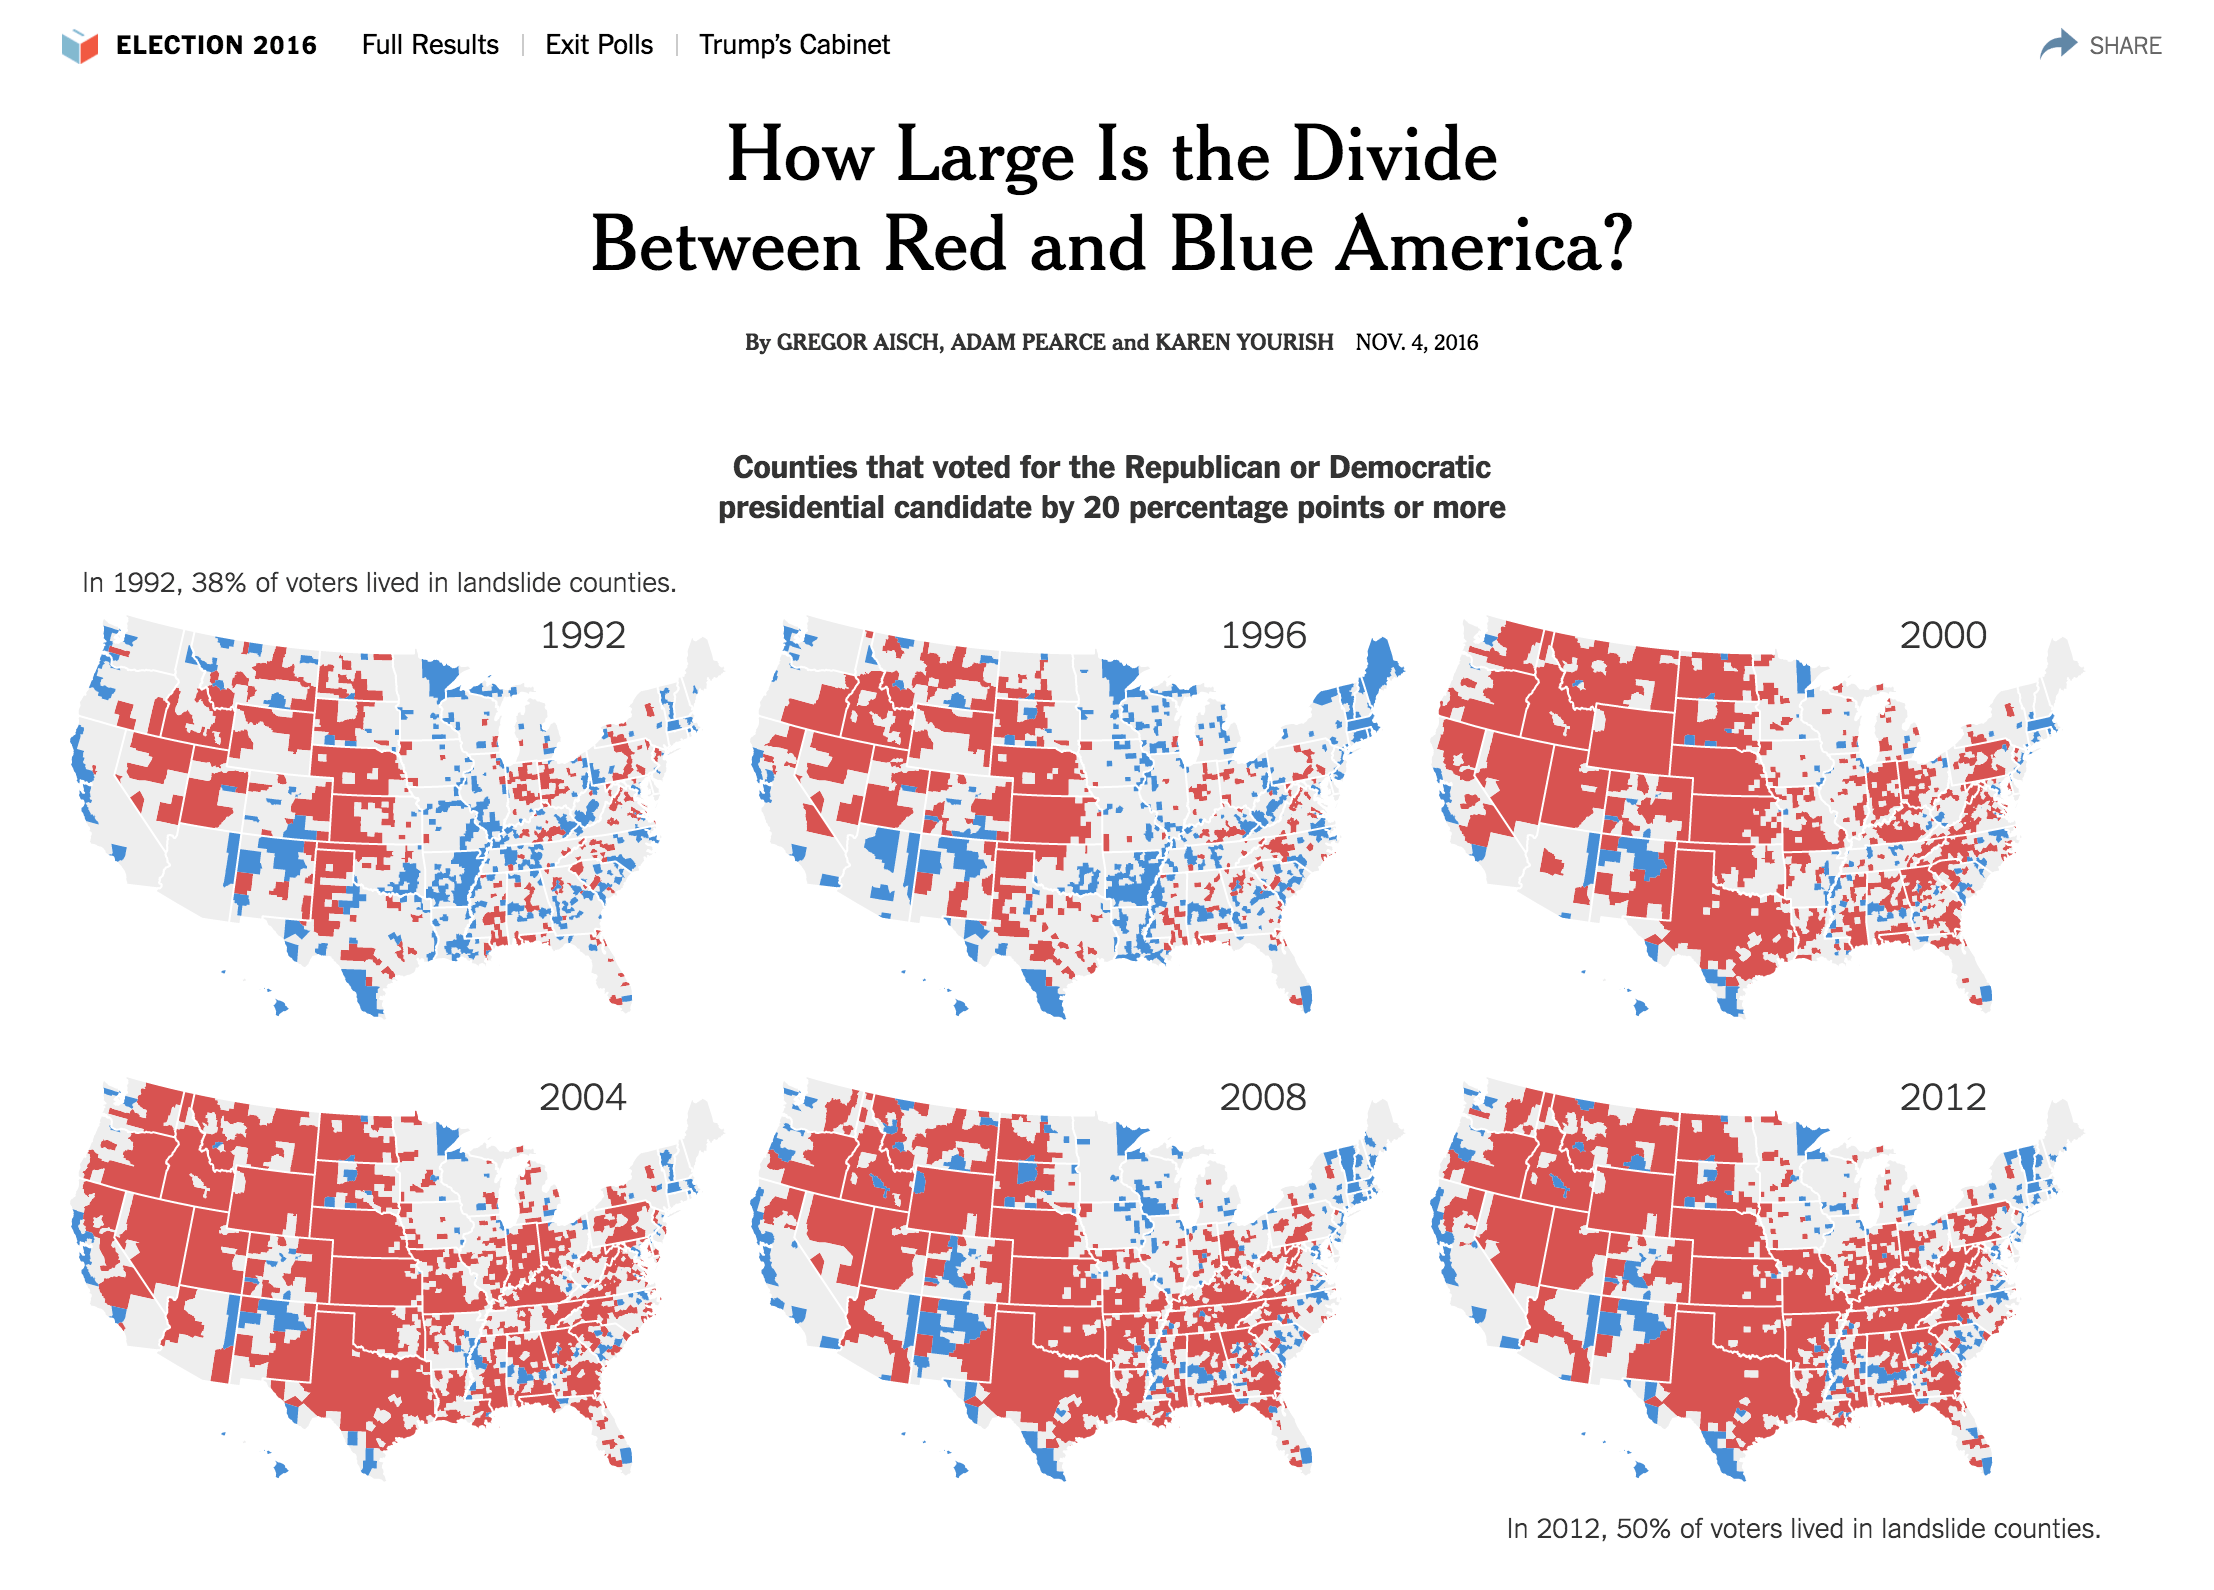 How Large Is the Divide Between Red and Blue America?